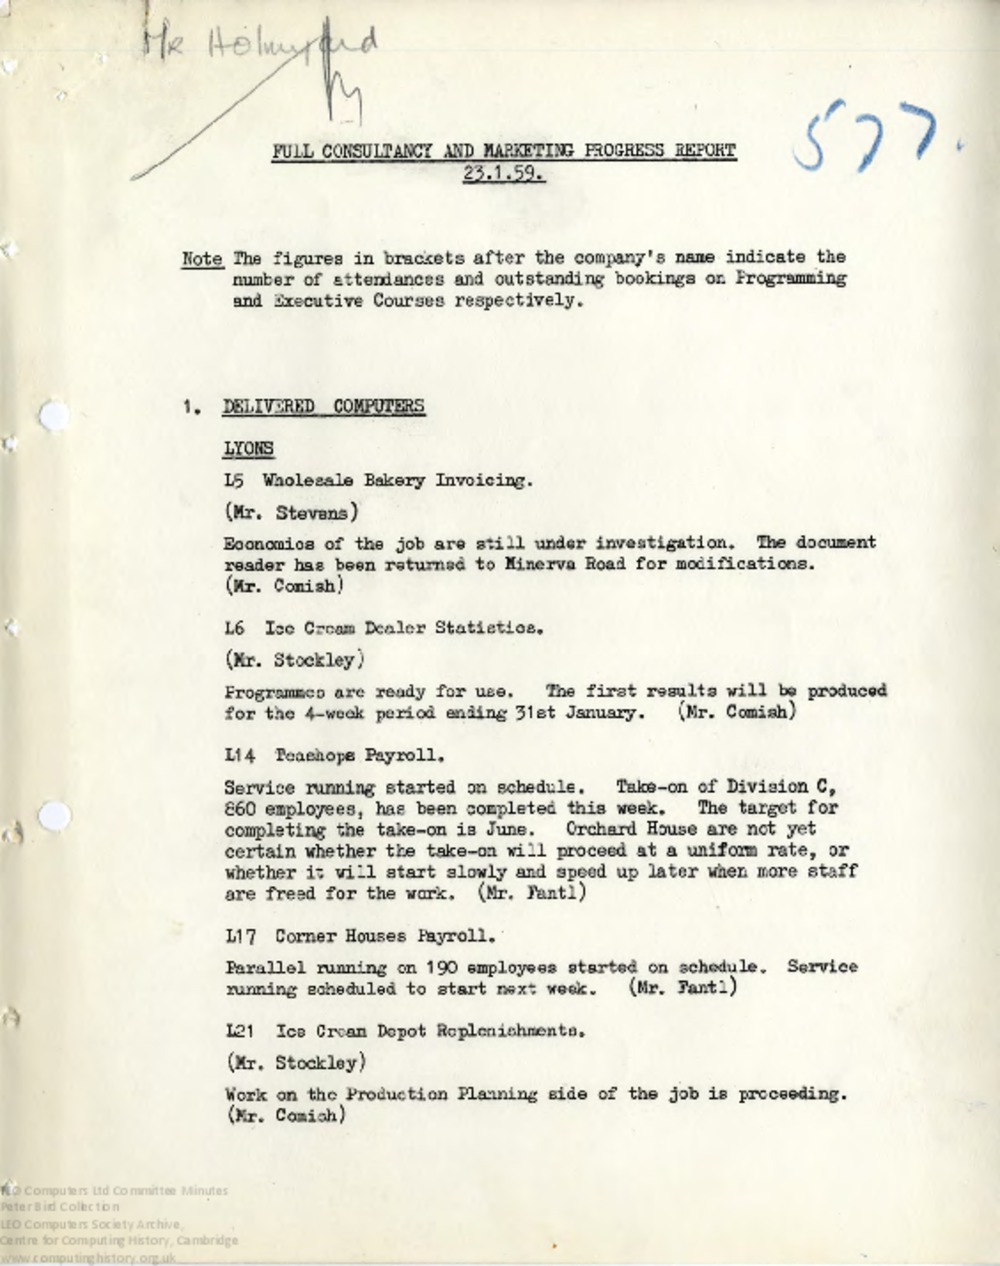 Article: 64469 Consultancy and Marketing Progress Minutes and Full Report, 23rd Jan1959